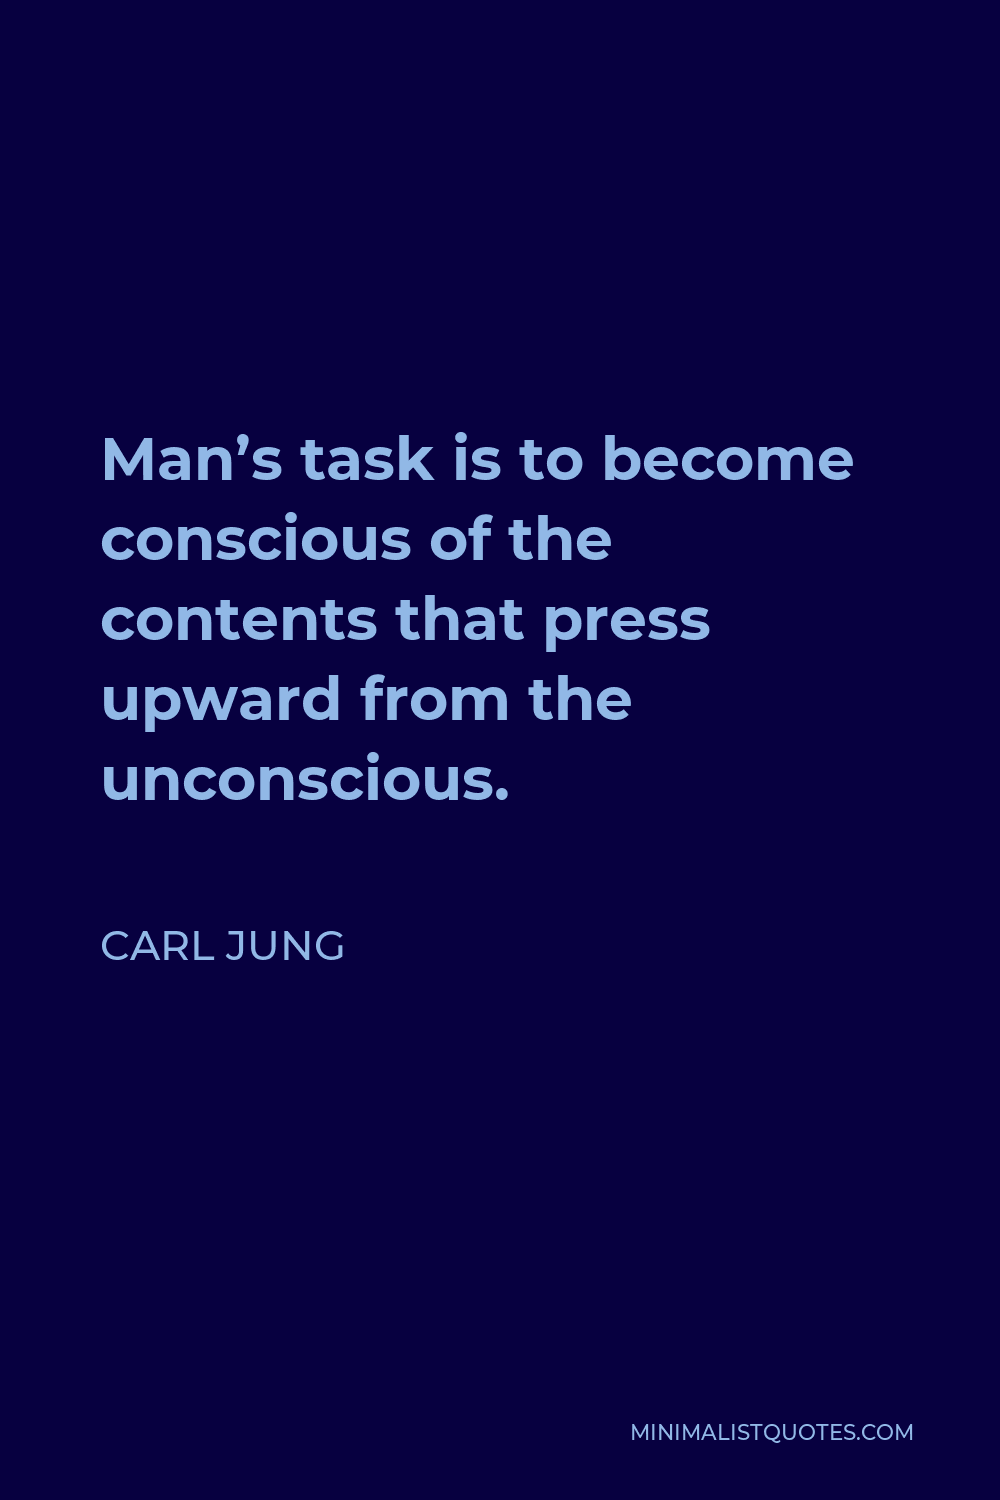 Carl Jung Quote - Man’s task is to become conscious of the contents that press upward from the unconscious.